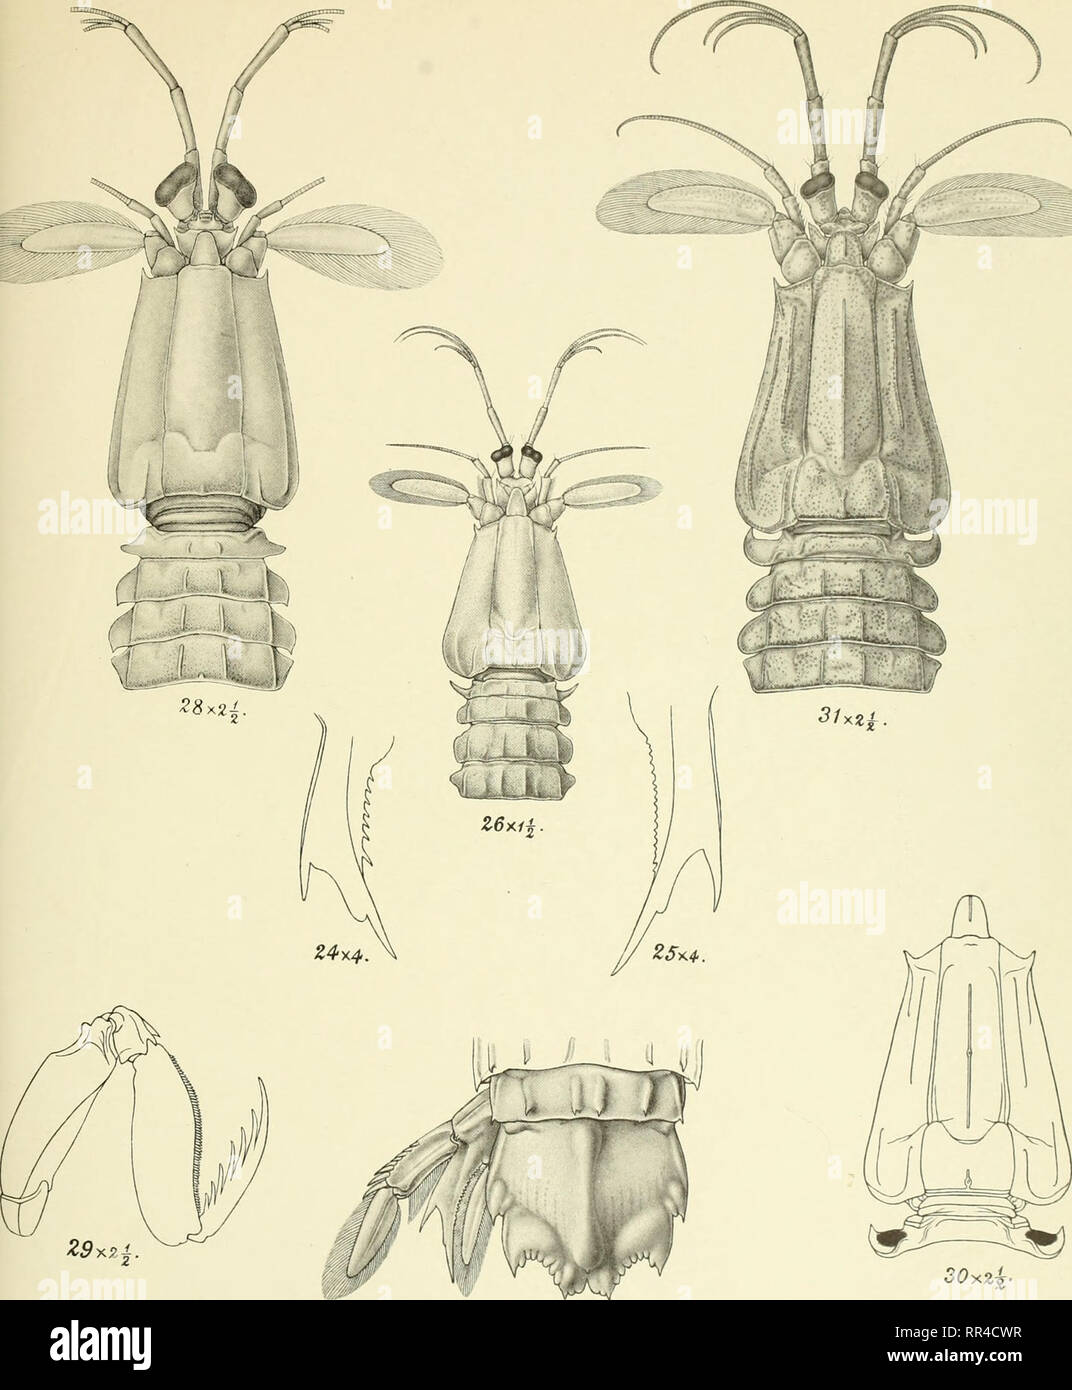 . An account of the Crustacea Stomatopoda of the Indo-Pacific region based on the collection in the Indian Museum ... with which are issued illustrations of the zoology of the R.I.M.S.S. &quot;Investigator&quot; ... Stomatopoda; Crustacea. ZOOLOGY OF THE R. I. M. S. 'INVESTIGATOR. Ceustacea Stomatopoda, Plate II.. Z9y.2i 30^z^ -27x2. S. C. Mondul, del. Photo -Engraved k printed at the Offices of the Survey of India, Calcutta, 1912, Fig. 24 Squilla lata. Fig's. 25-27 Squilla gilesi. Fig.s. 28-29 Squilla armata. Fig. 30 Squilla scorpio. Fig. 31 Squilla scorpio var. immaculata.. Please note that  Stock Photo